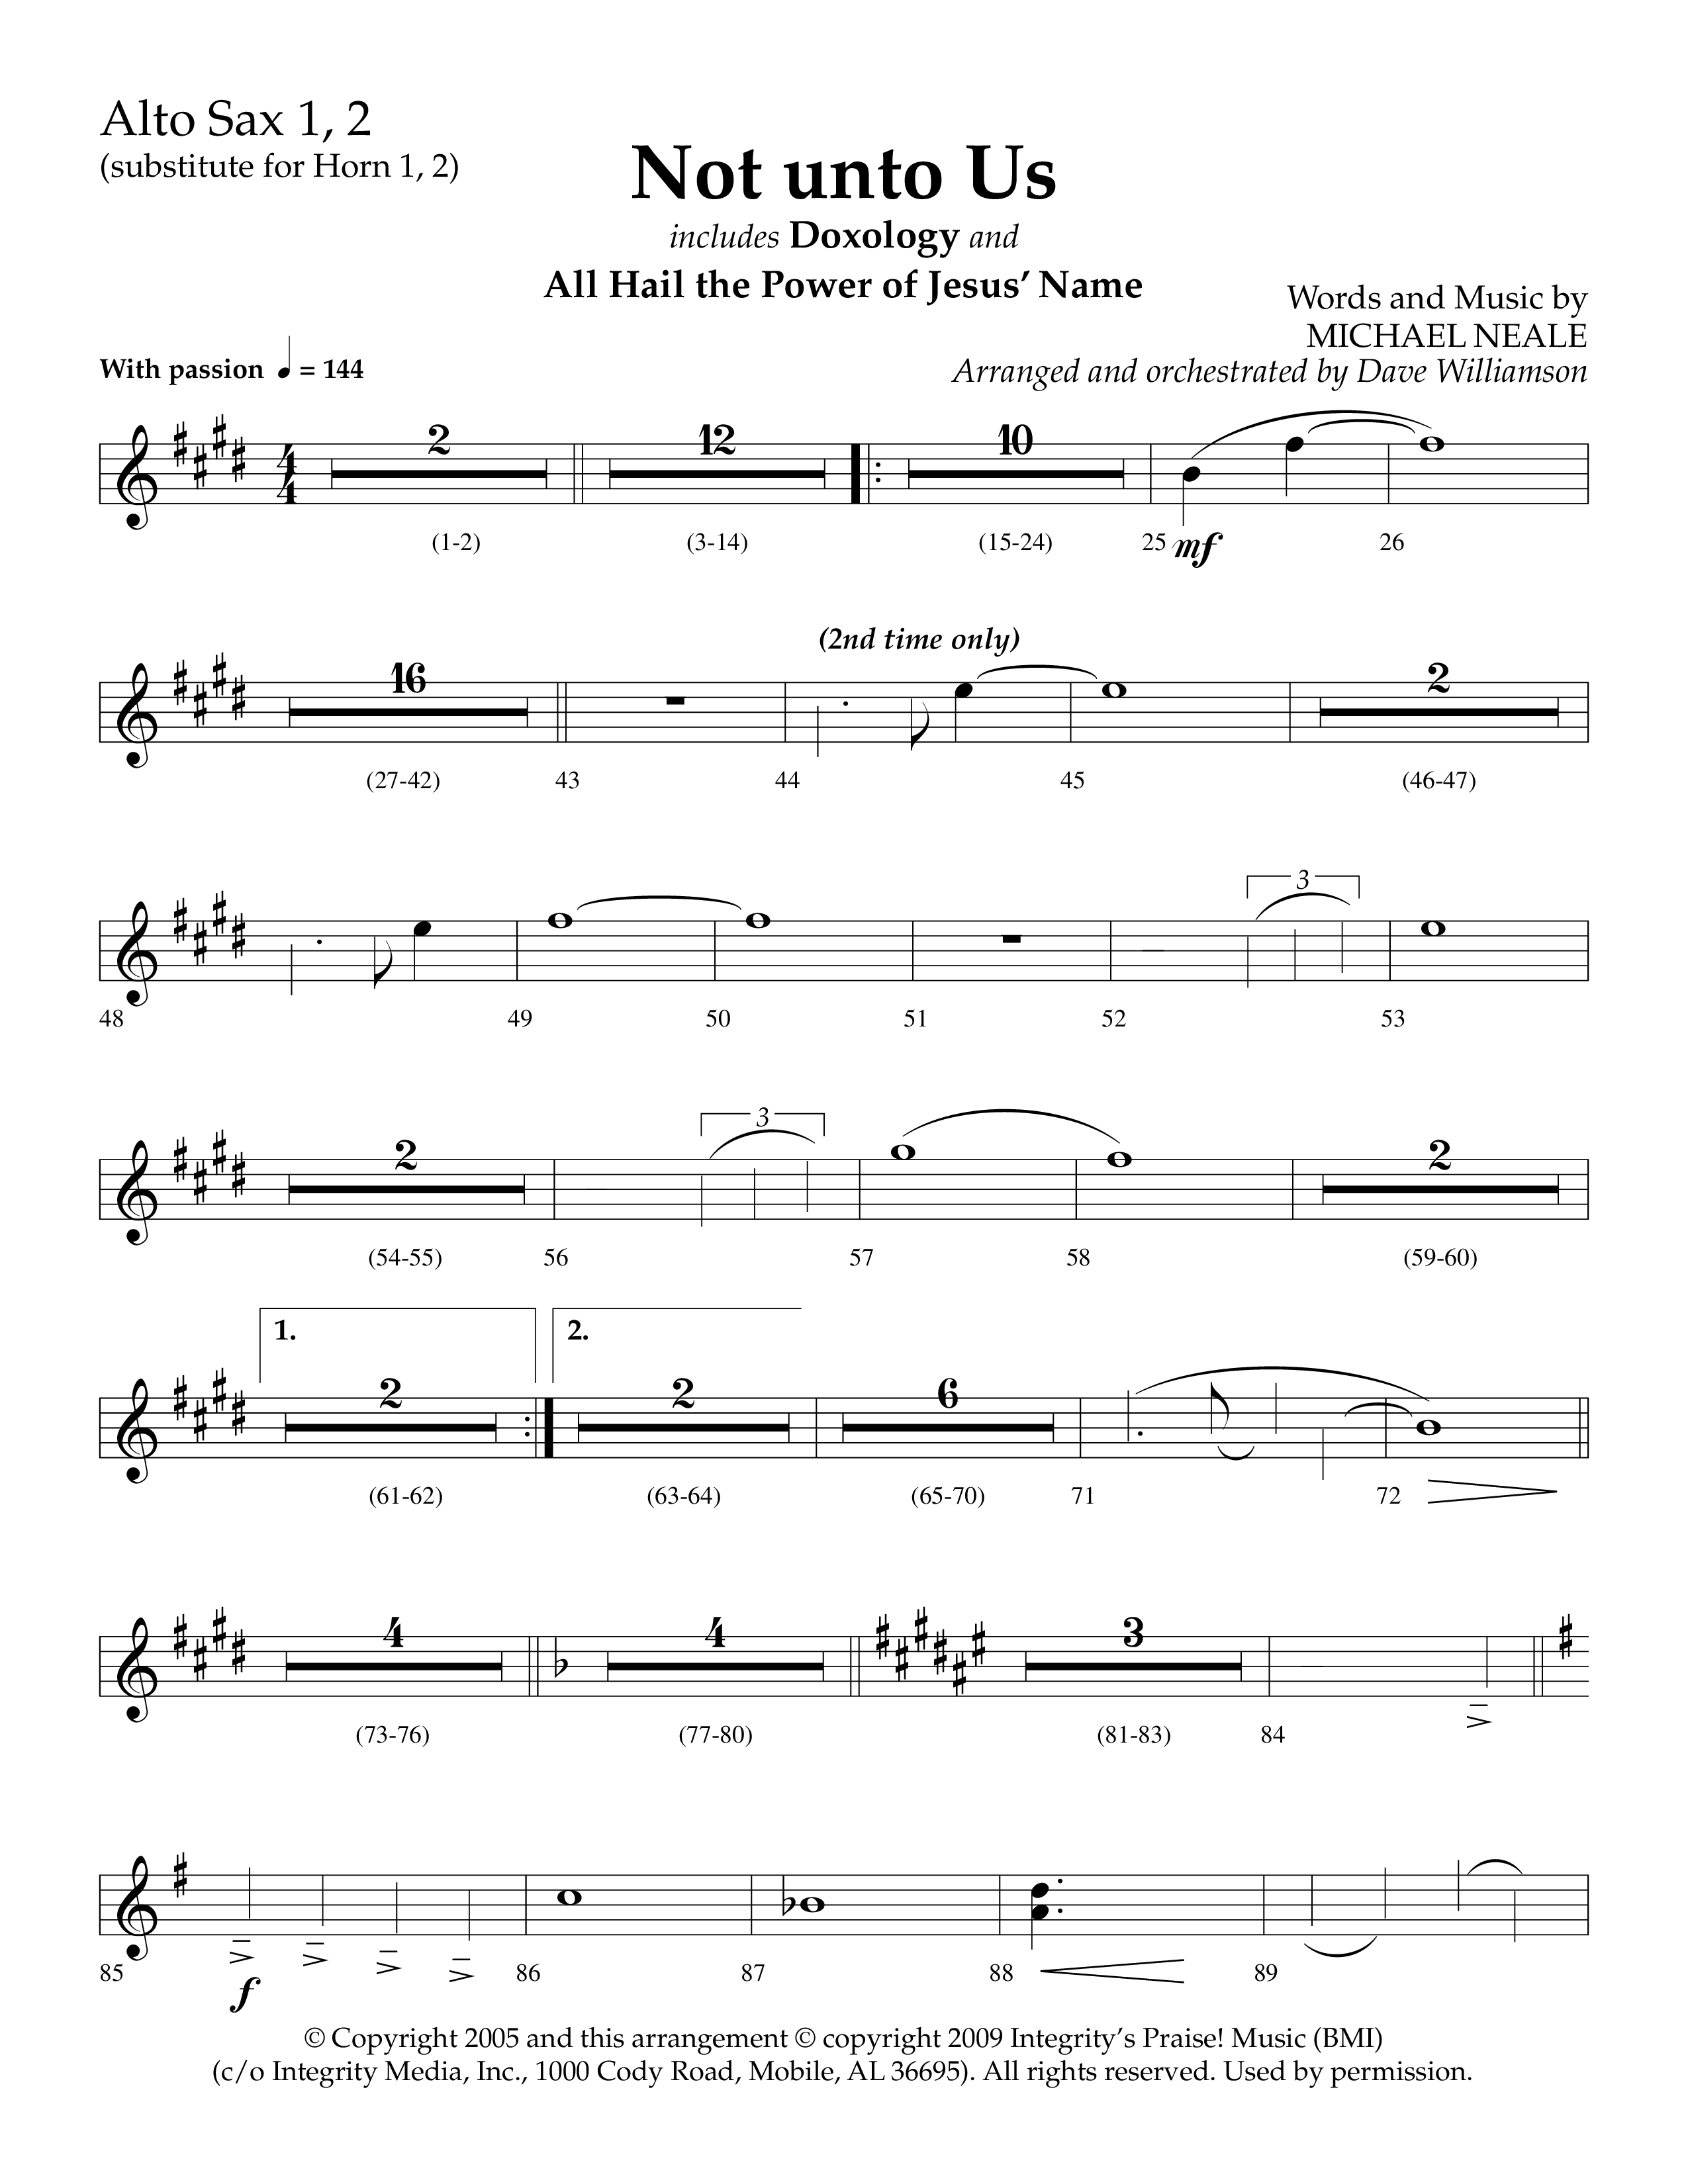 Not Unto Us (with Doxology, All Hail The Power Of Jesus Name) (Choral Anthem SATB) Alto Sax 1/2 (Lifeway Choral / Arr. Dave Williamson)